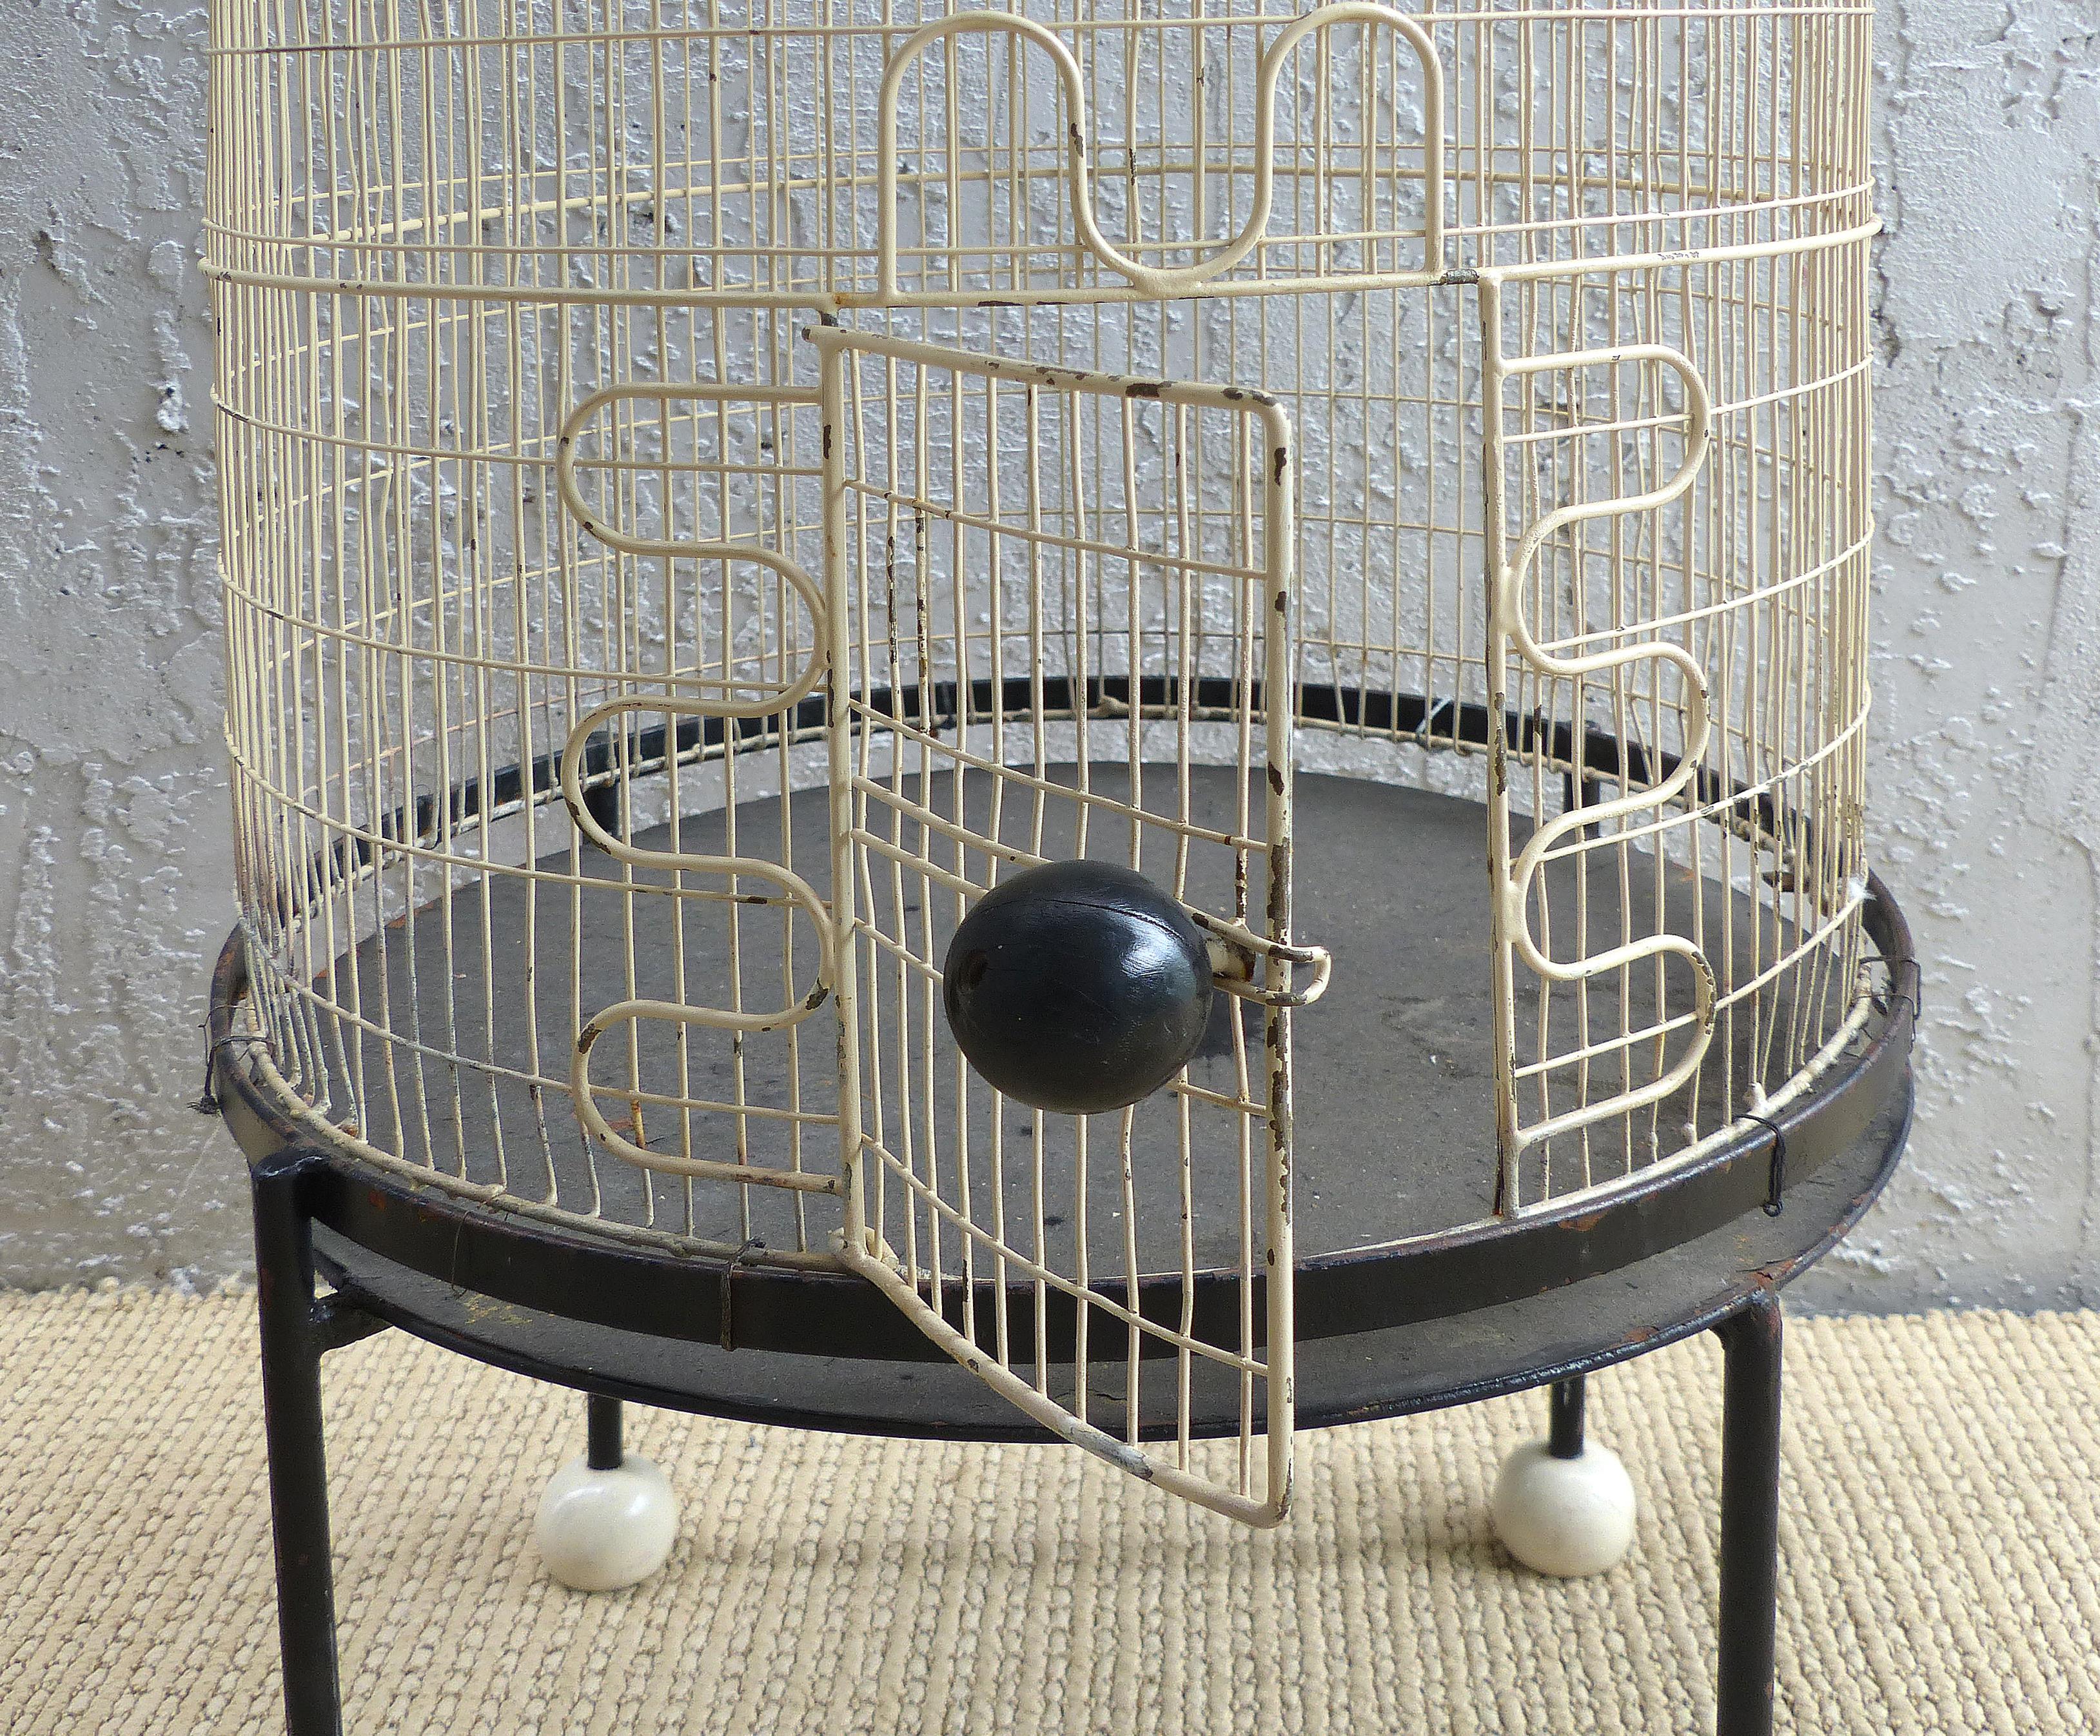 Painted Rare Sculptural Birdcage by Frederick Weinberg, circa 1955